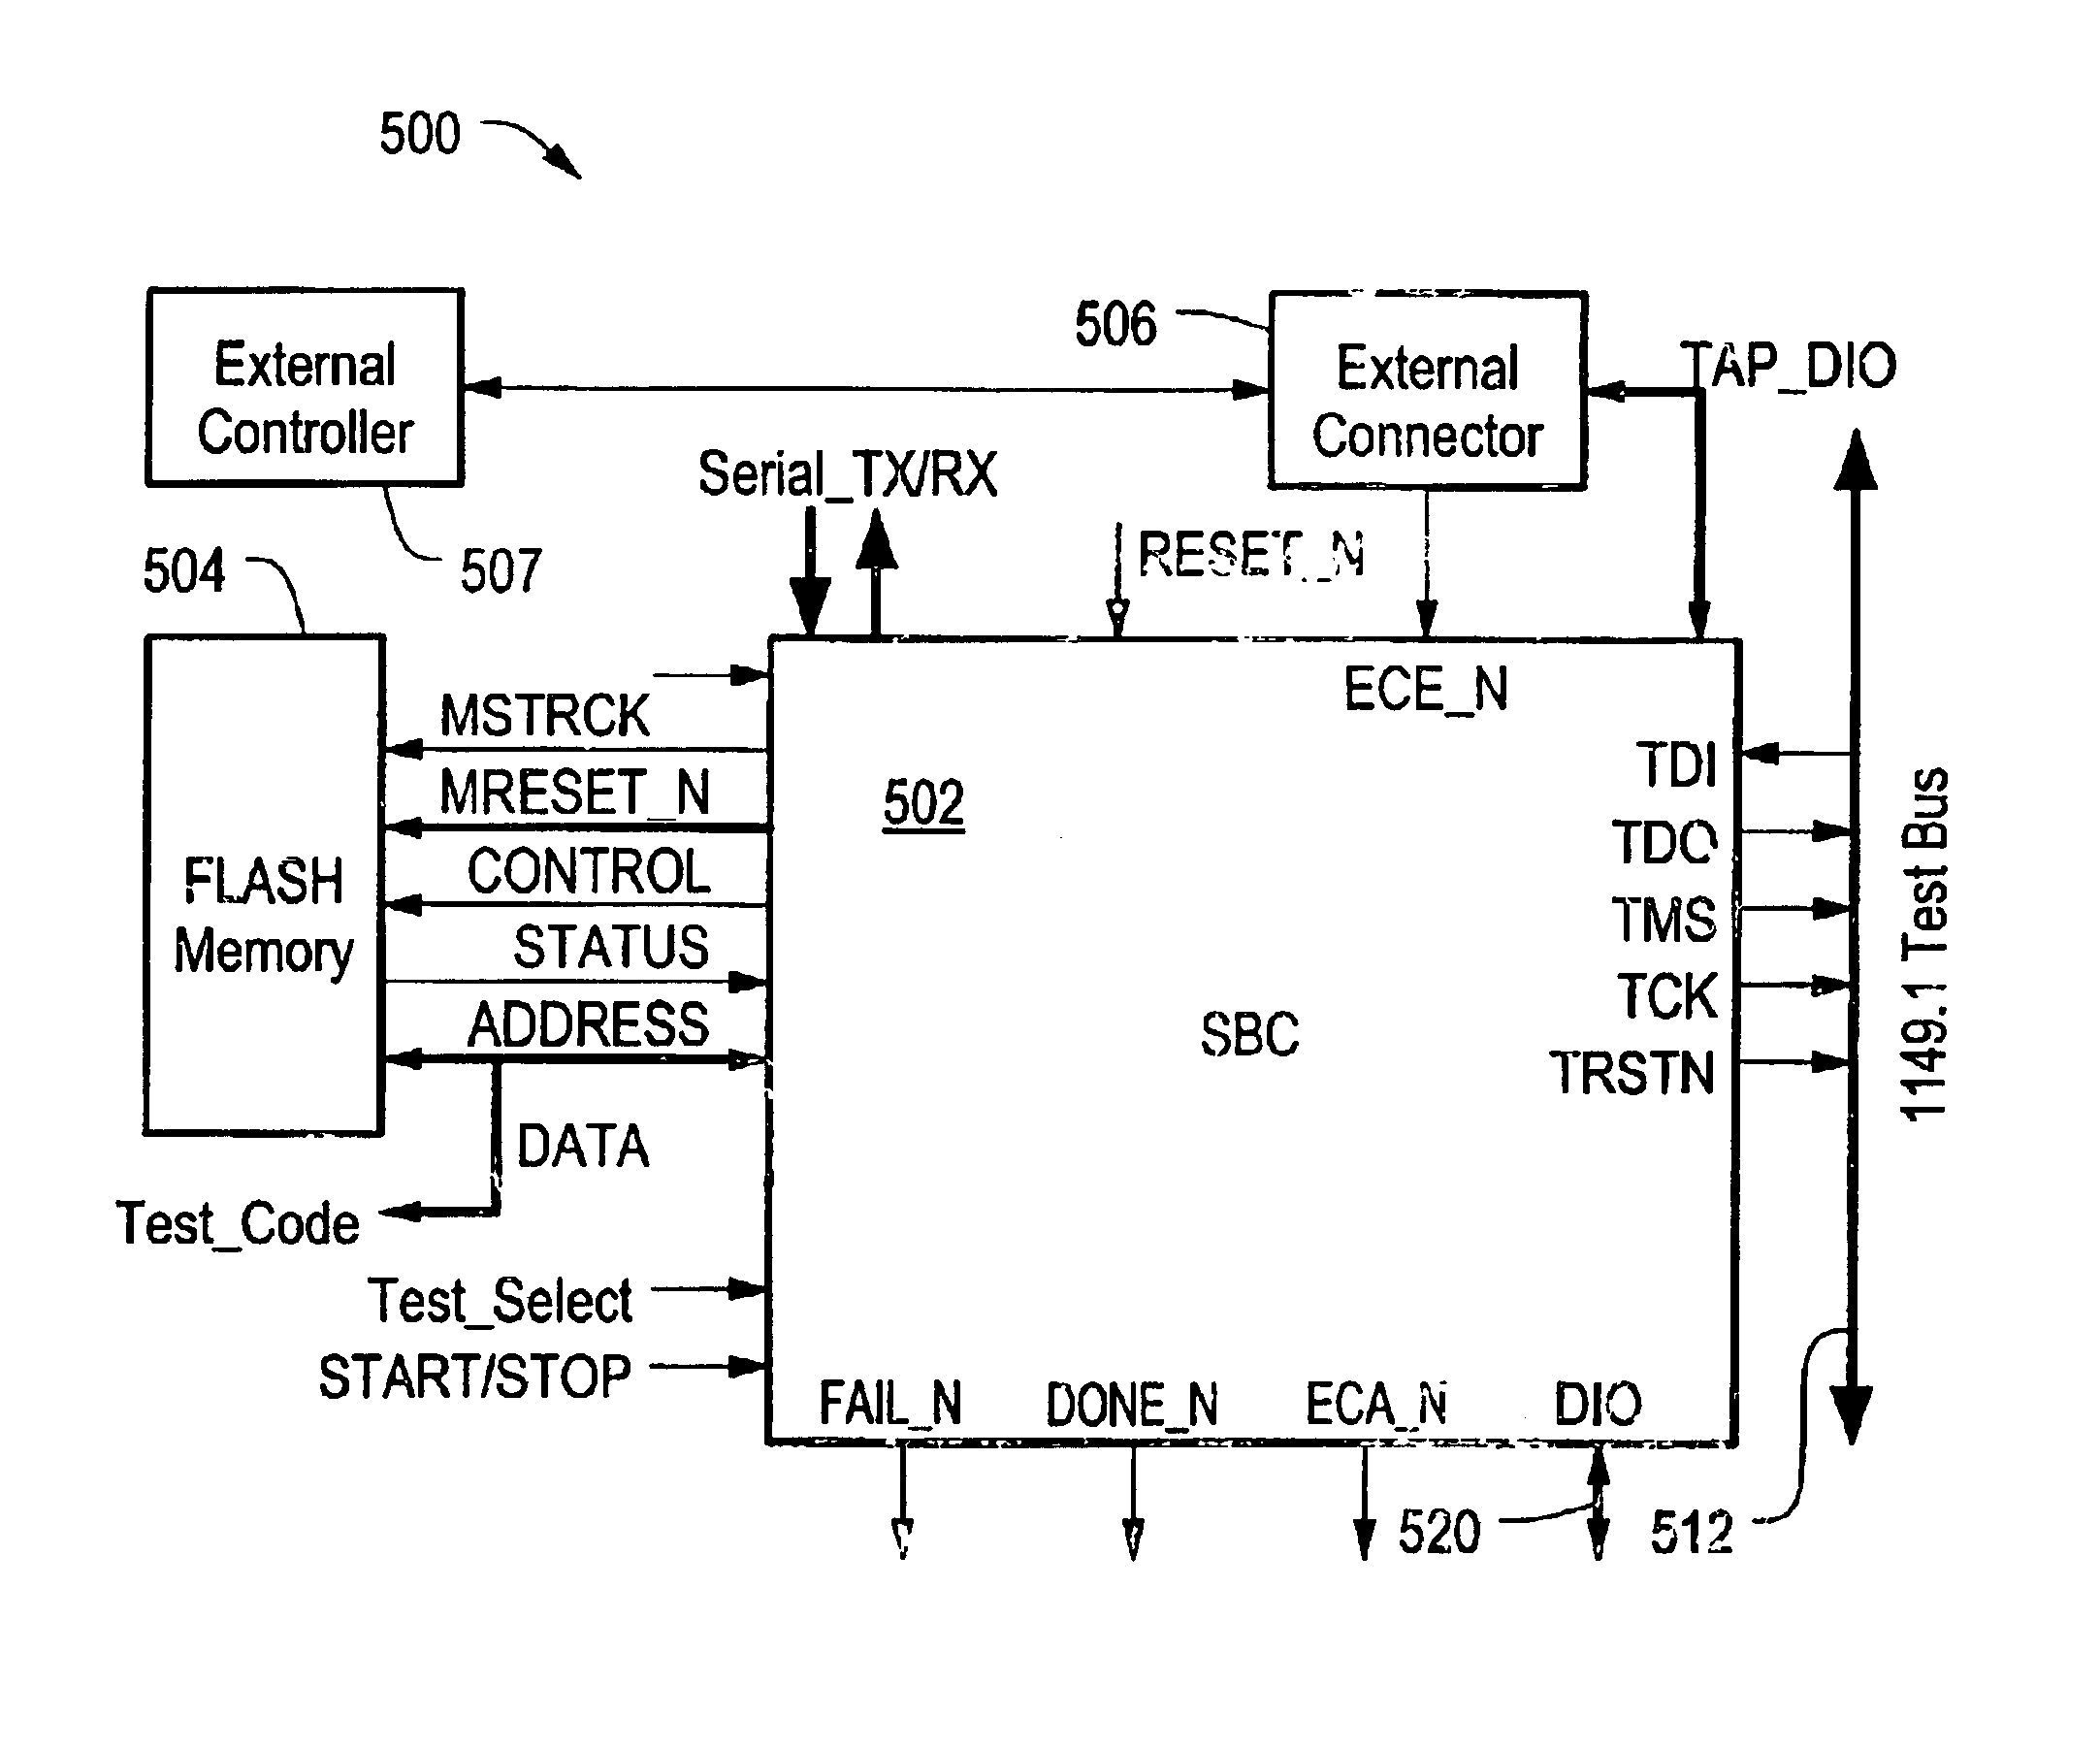 Method and apparatus for embedded built-in self-test (BIST) of electronic circuits and systems